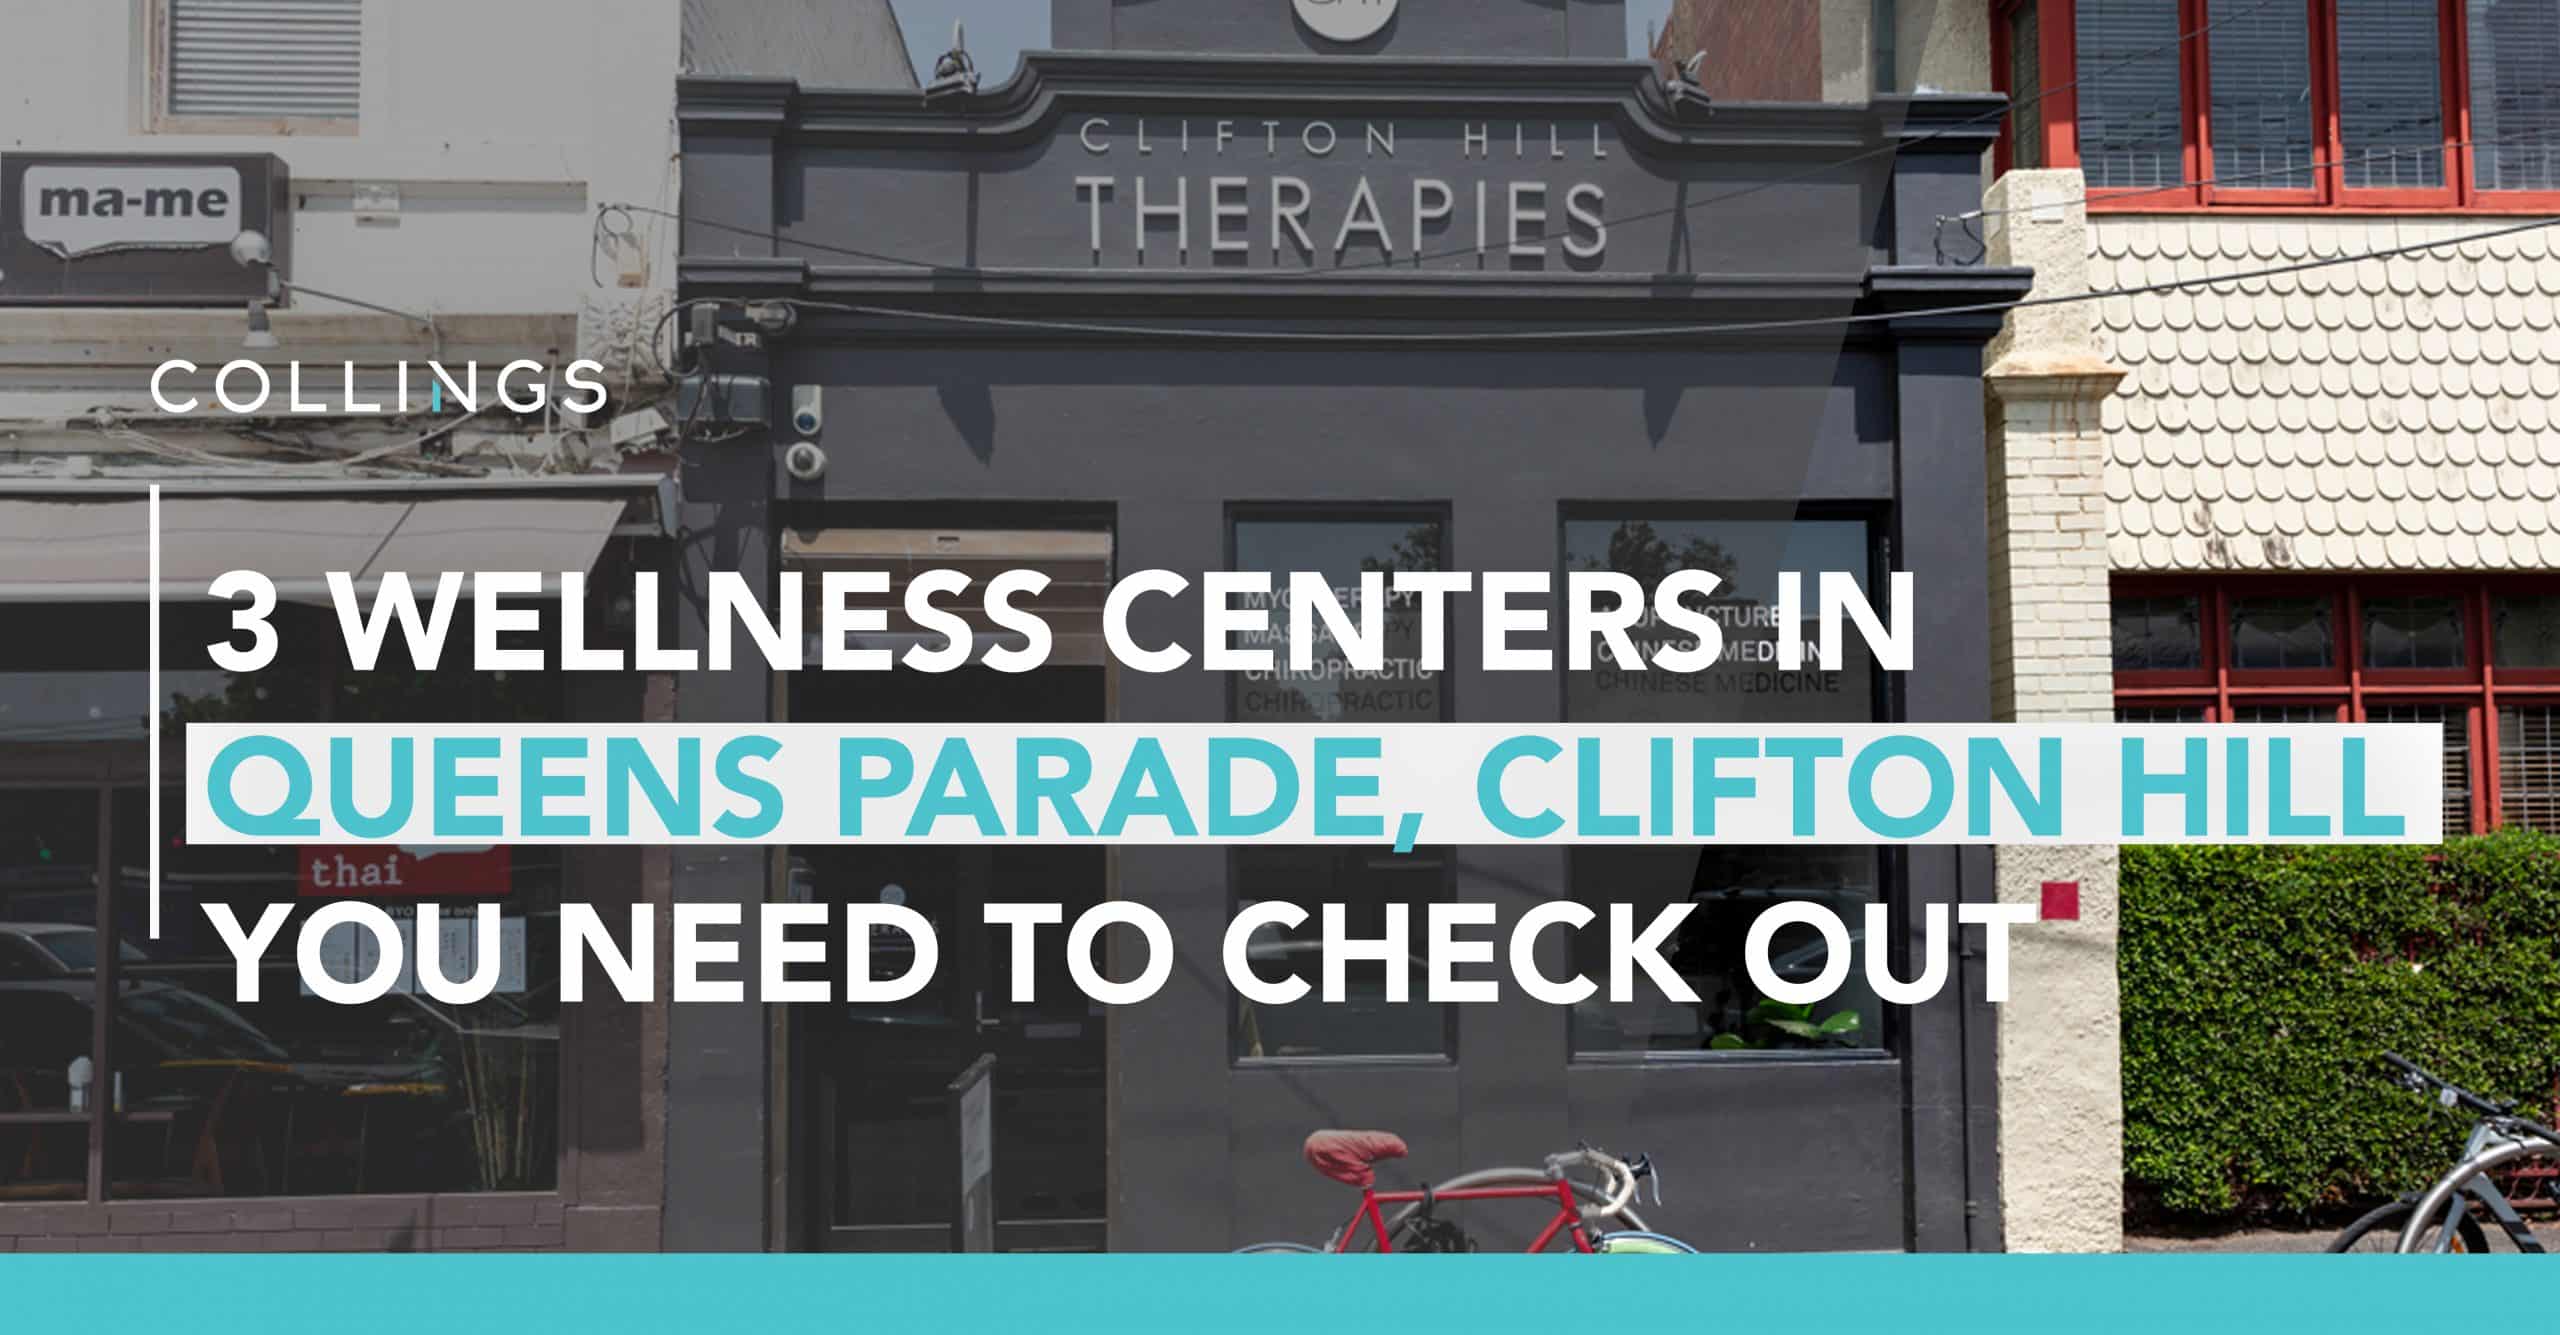 3 Wellness Centers in Queens Parade, Clifton Hill You Need to Check Out